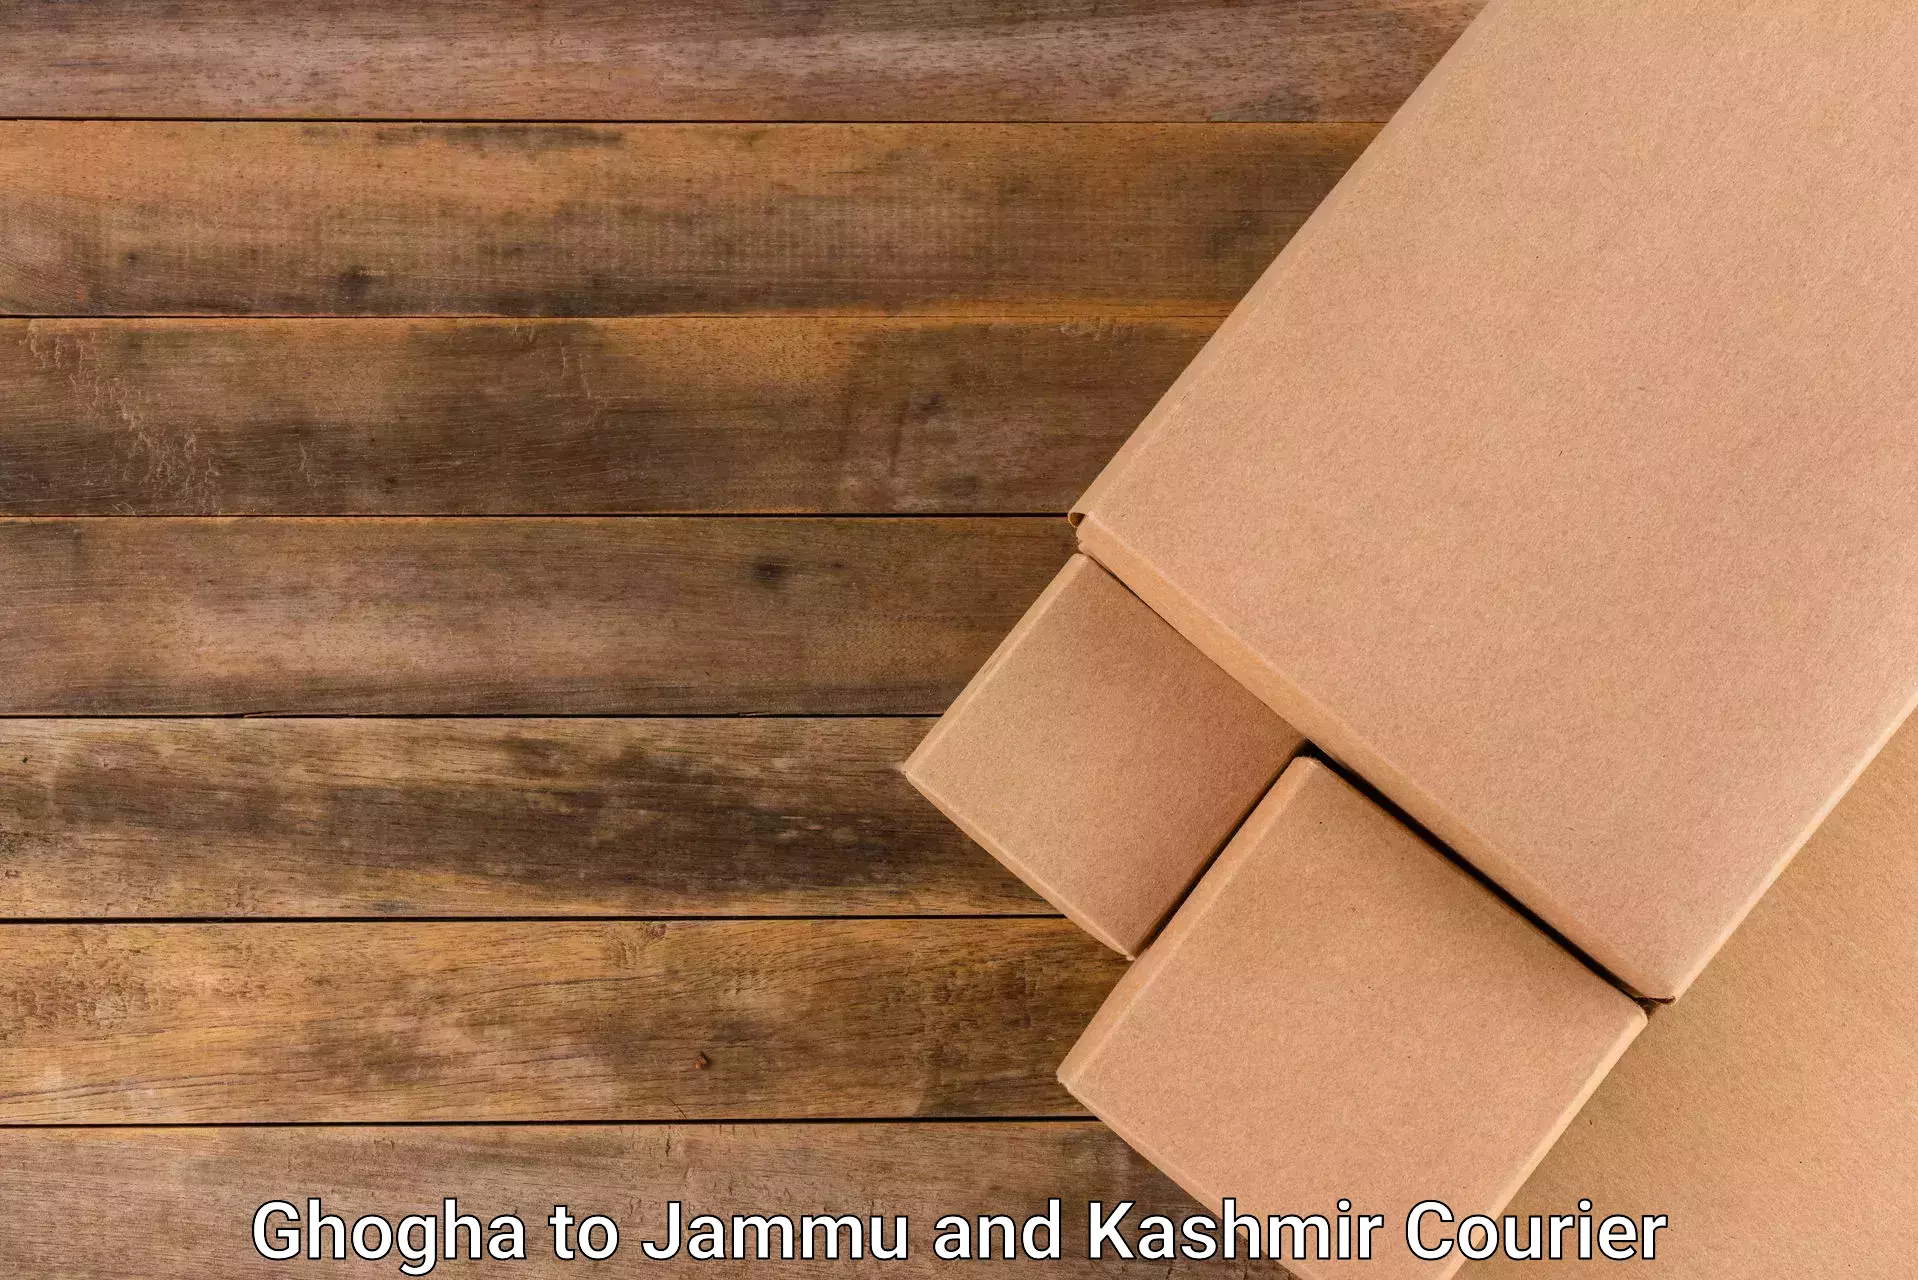 Courier service booking in Ghogha to University of Kashmir Srinagar